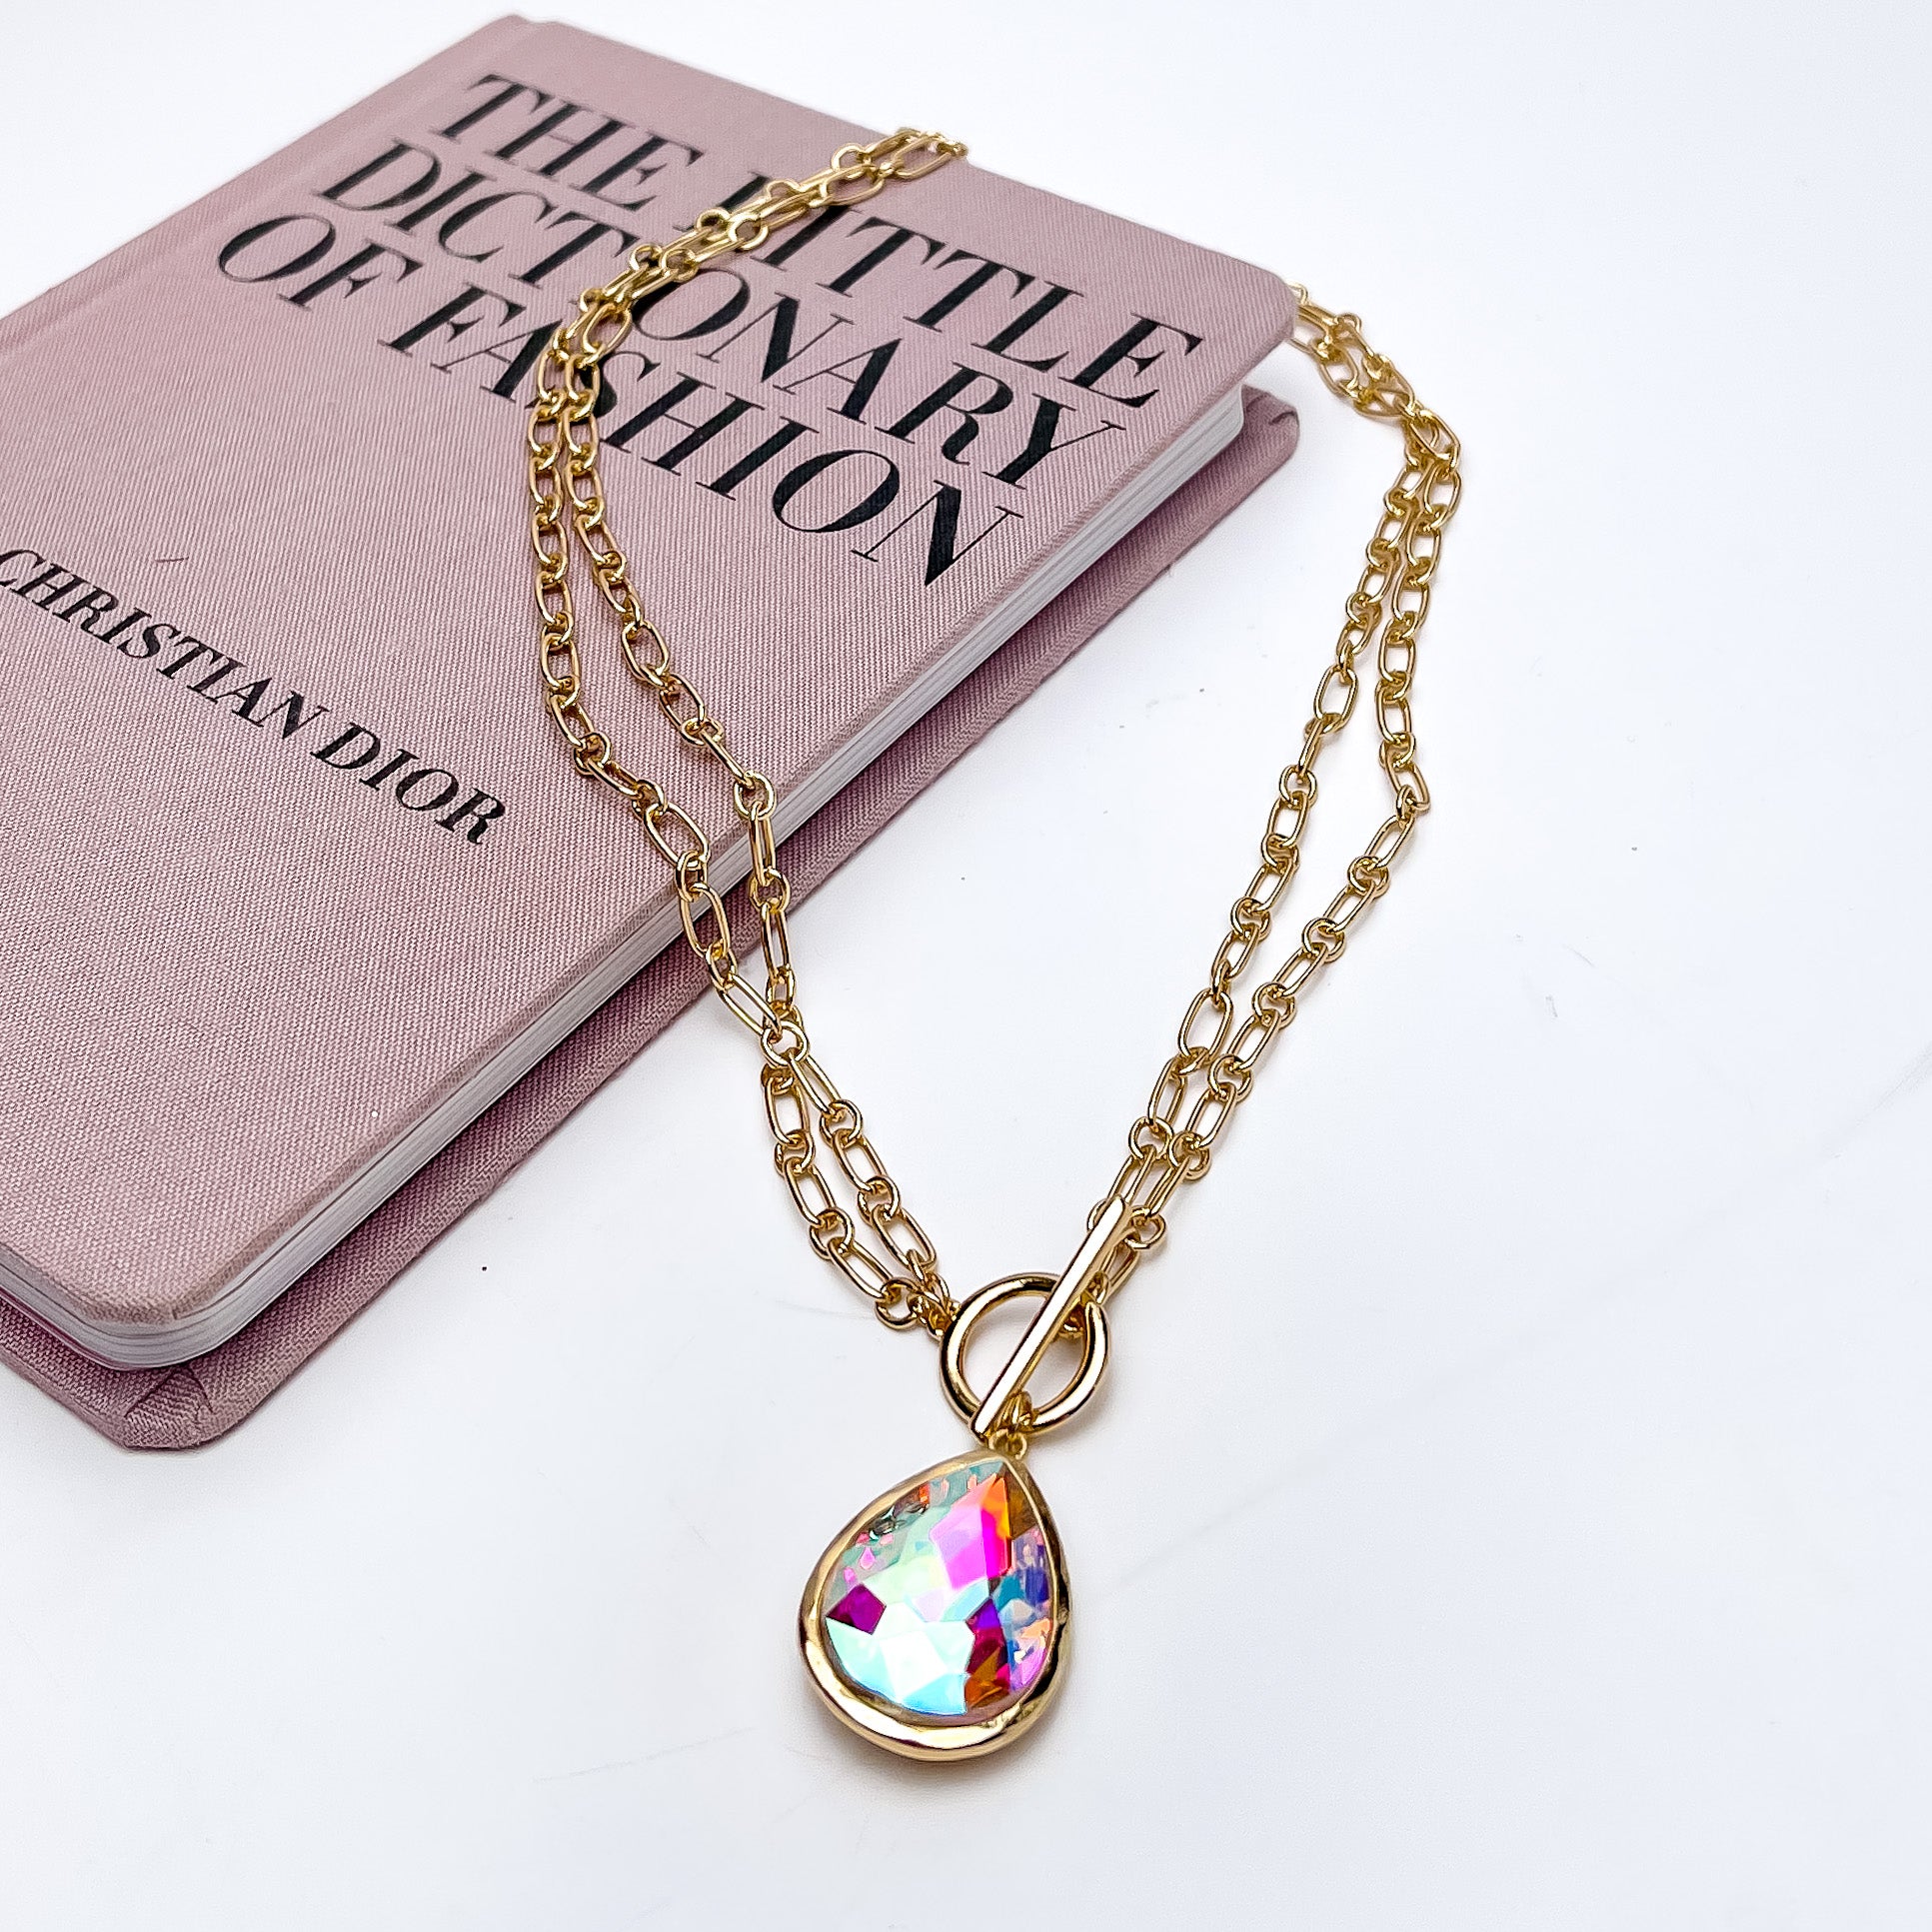 Center of Attention Gold Tone Chain Necklace With AB Crystal Pendant. Pictured on a white background with part of the necklace on a pink book.